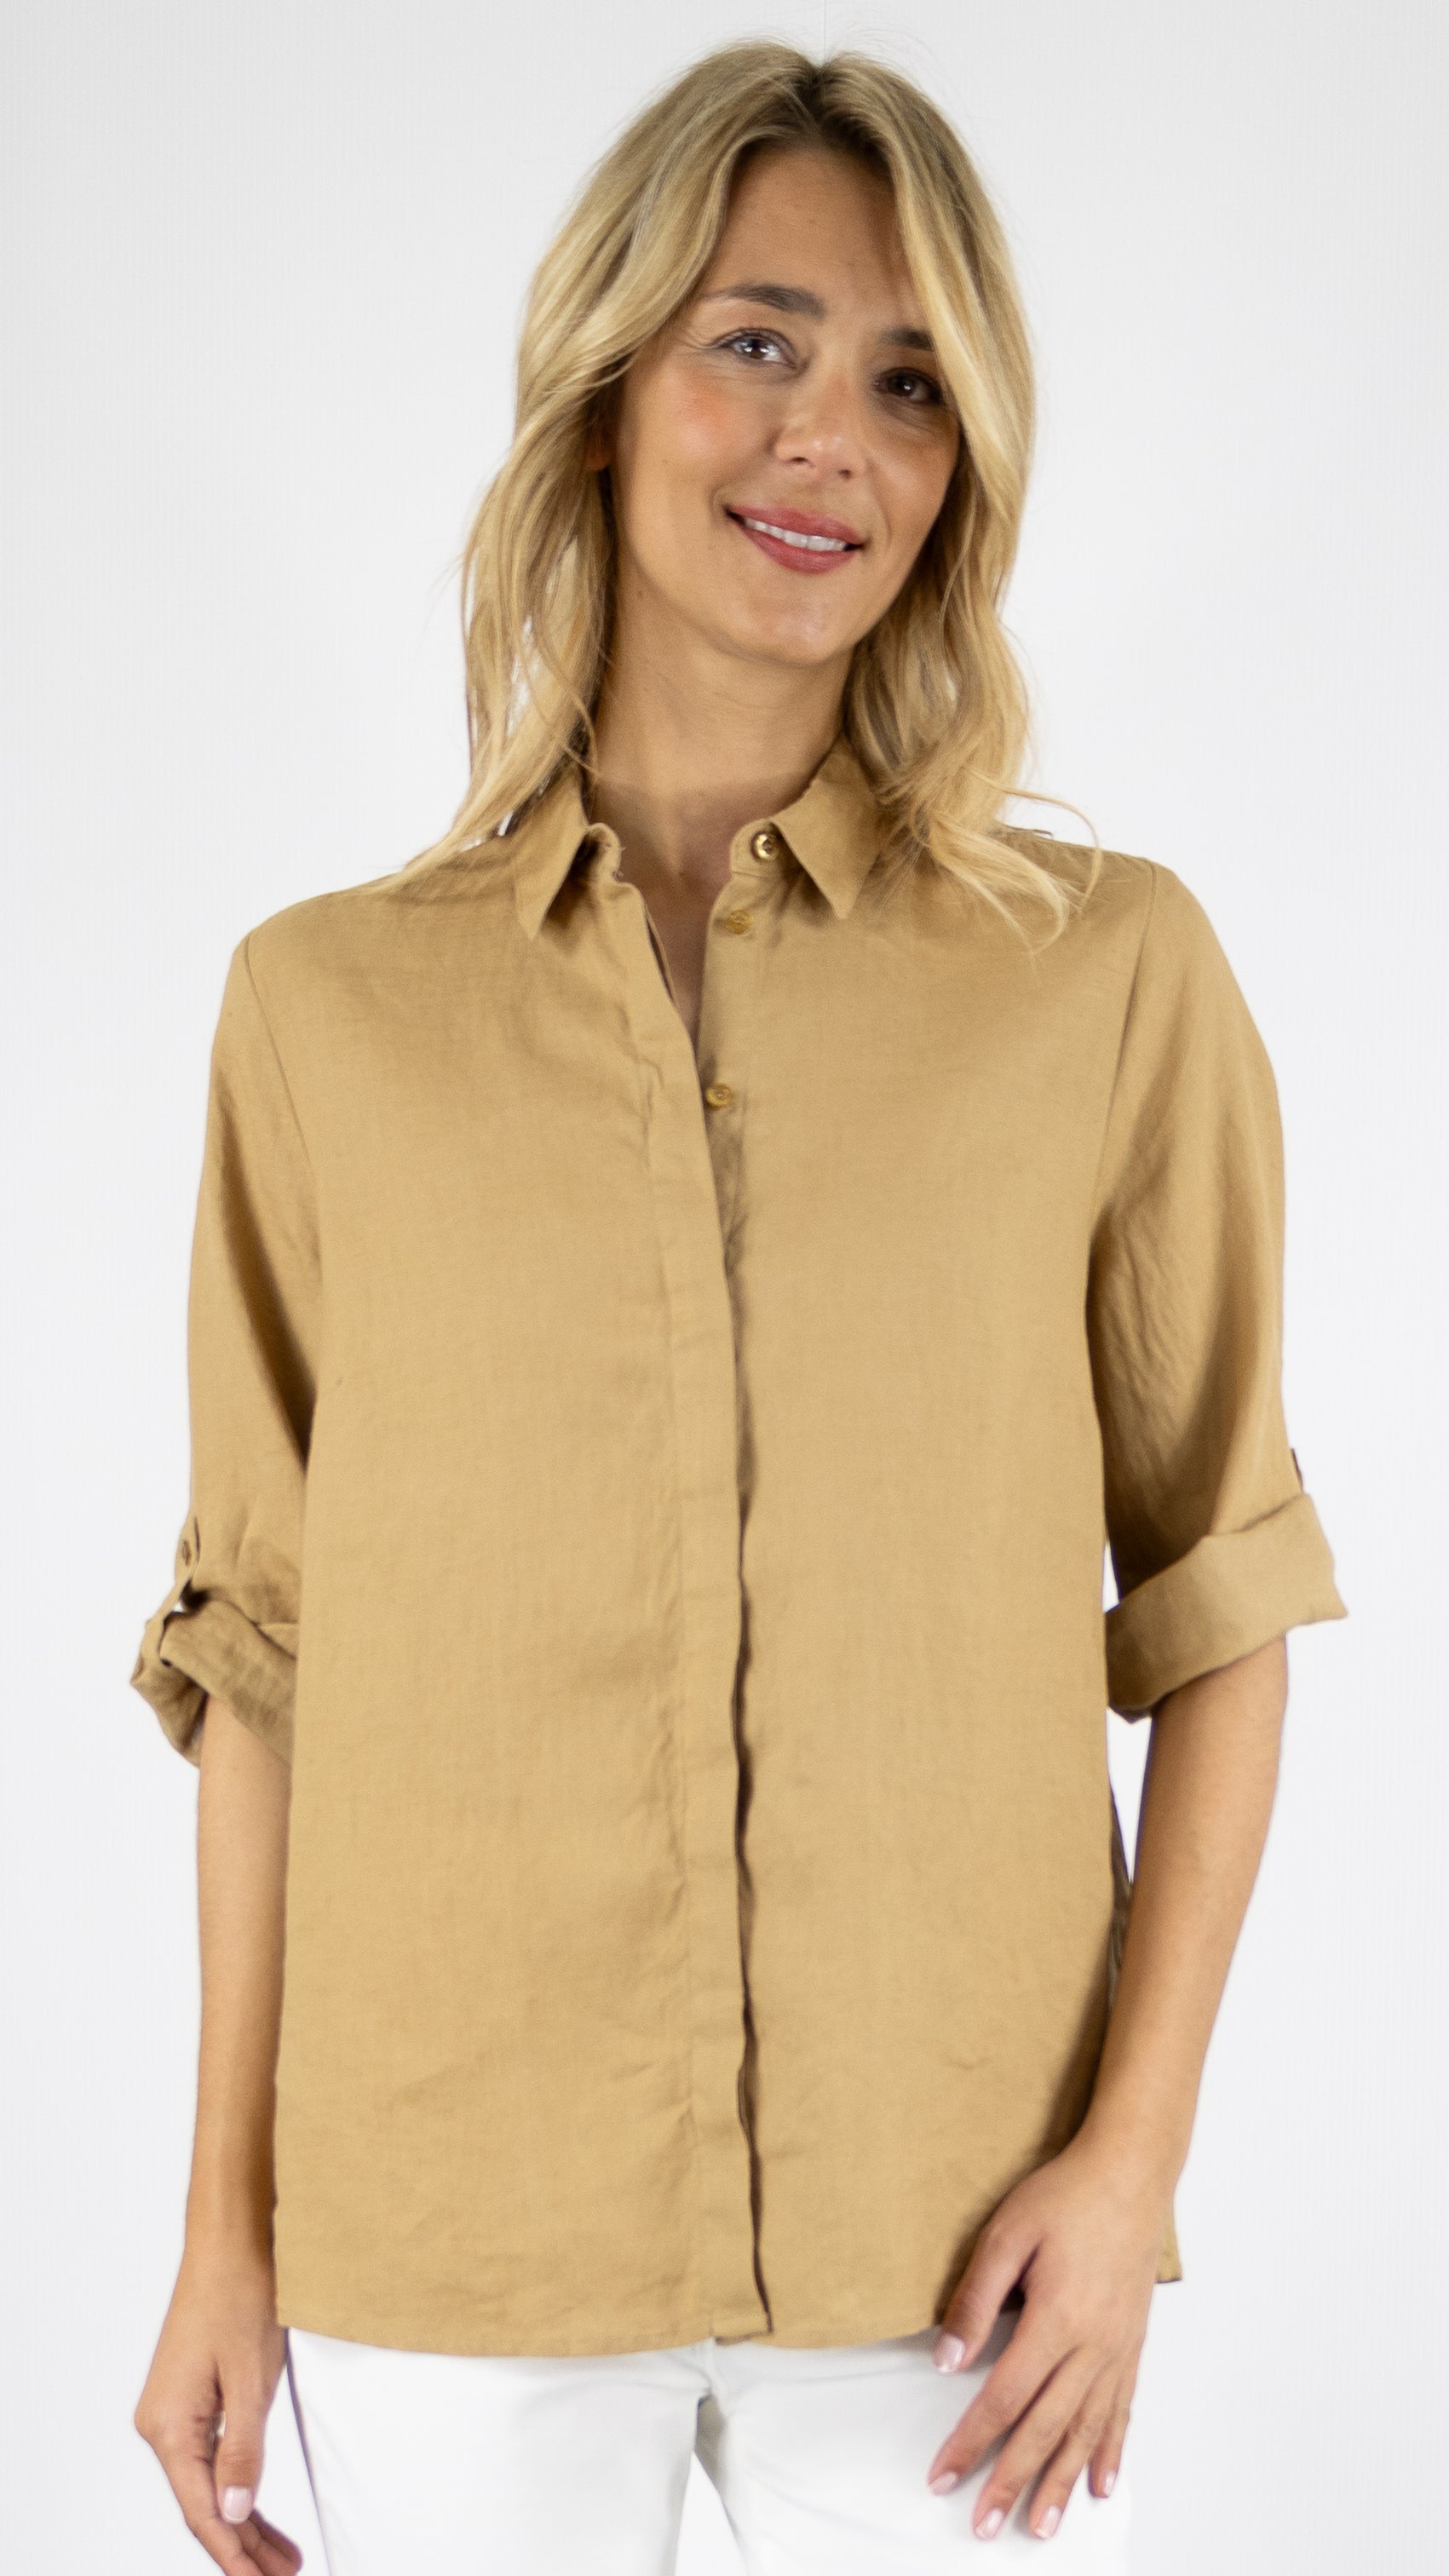 CHEMISE EN LIN MANCHES 3/4 TONI 1438/02 71027 TABAC CAMEL #color_740/TABAC